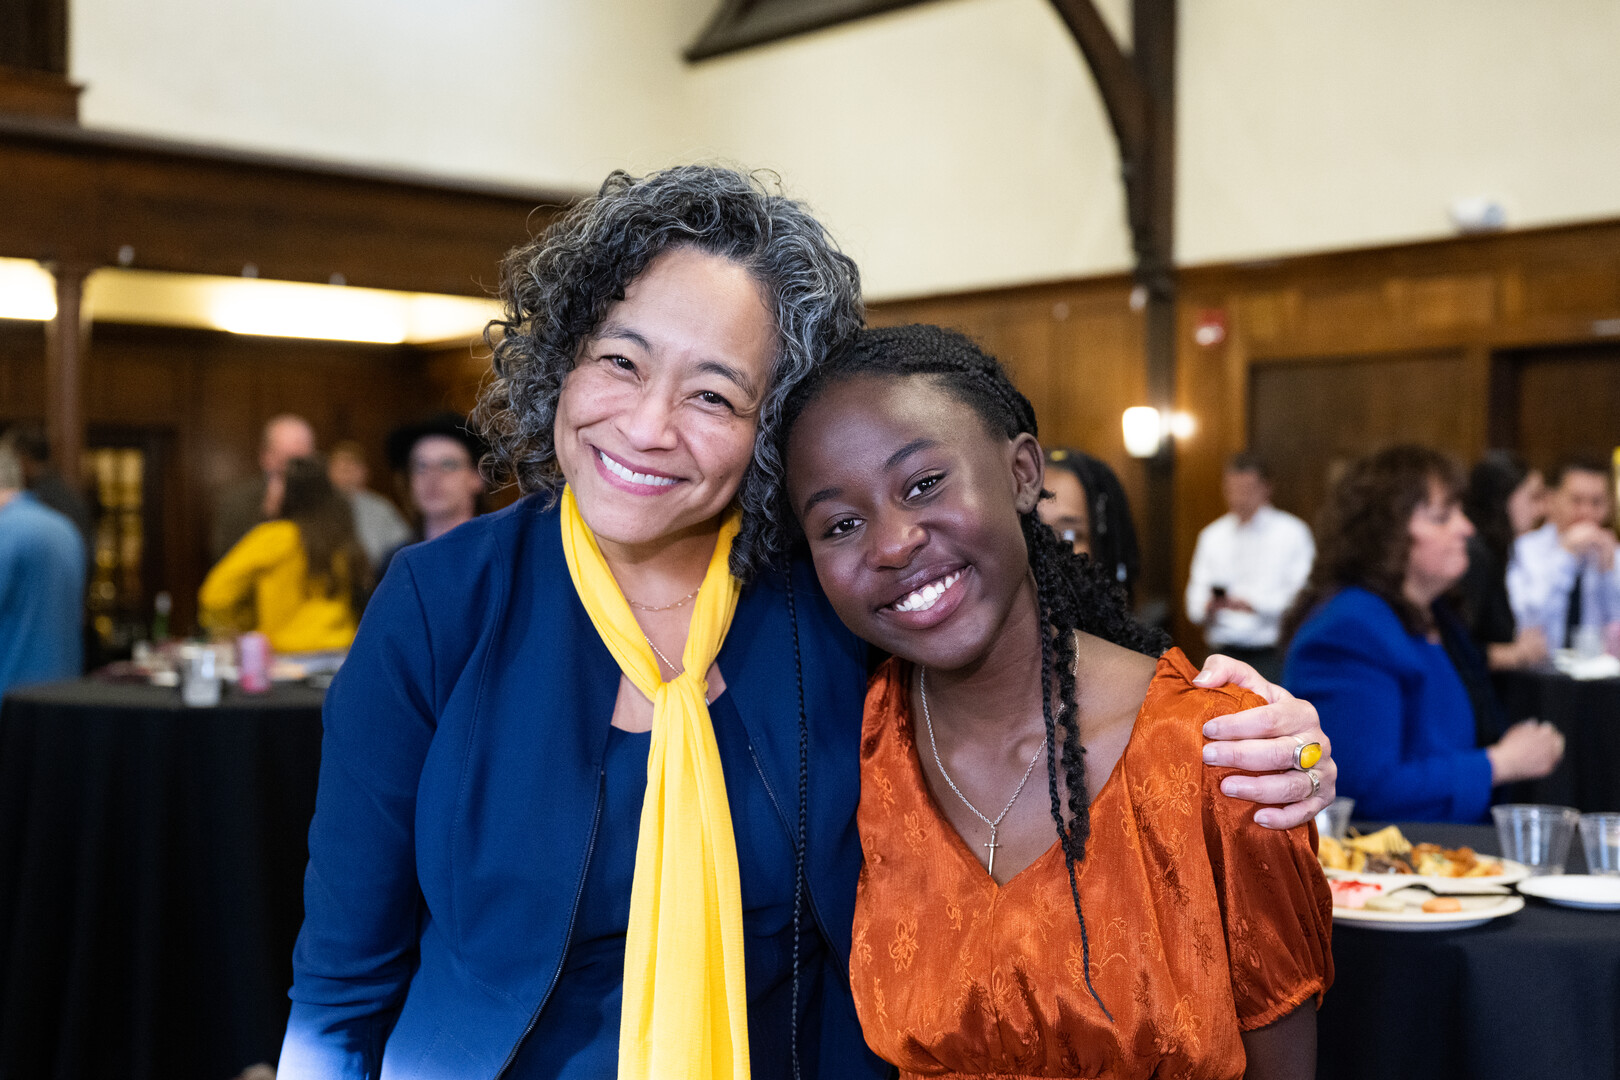 Colorado College President L. Song Richardson congratulates a Stroud Scholar.  Photo by Lonnie Timmons III